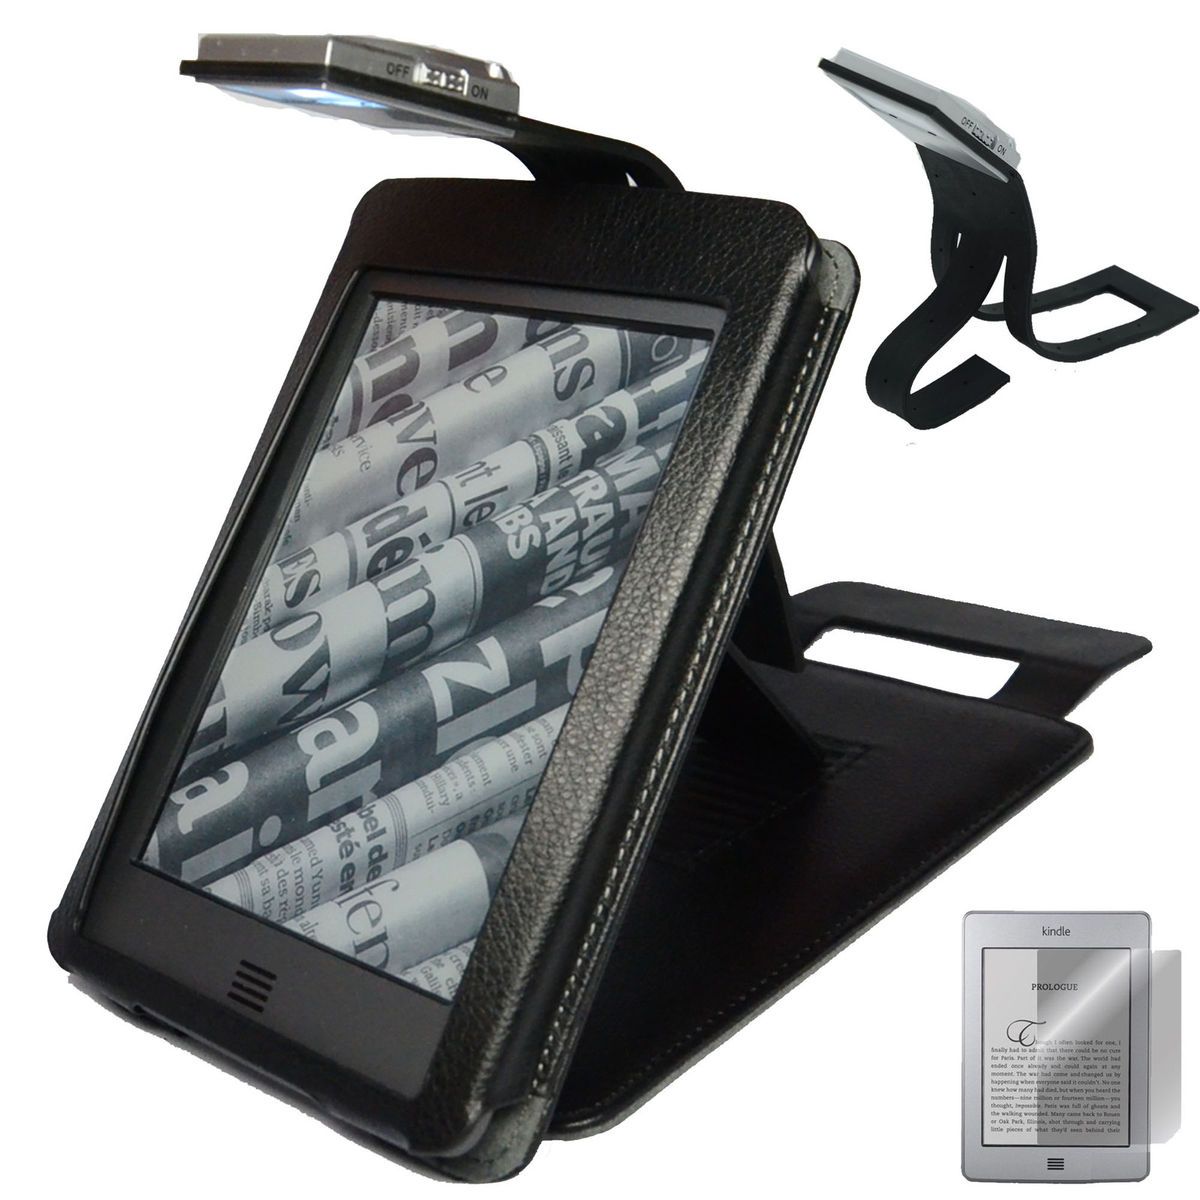 KINDLE TOUCH BLACK COVER CASE STAND WITH READING LIGHT LIGHTED SCREEN